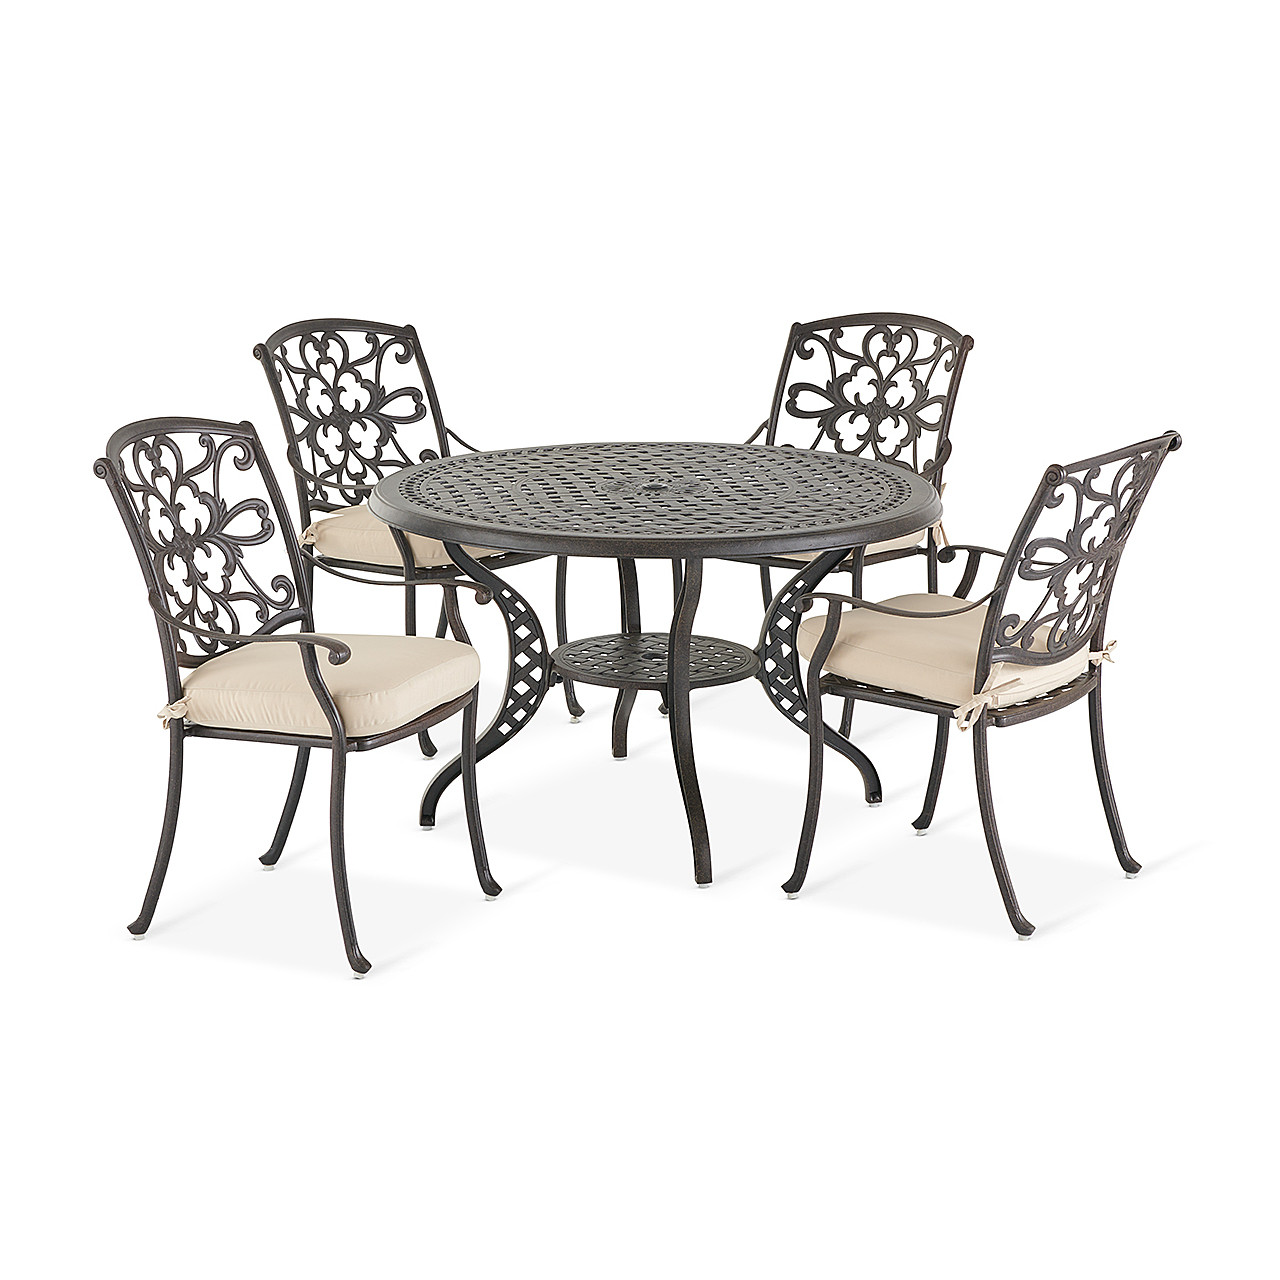 Carlisle Aged Bronze Cast Aluminum and Cushion 5 Pc. Dining Set with 48 in. D Table